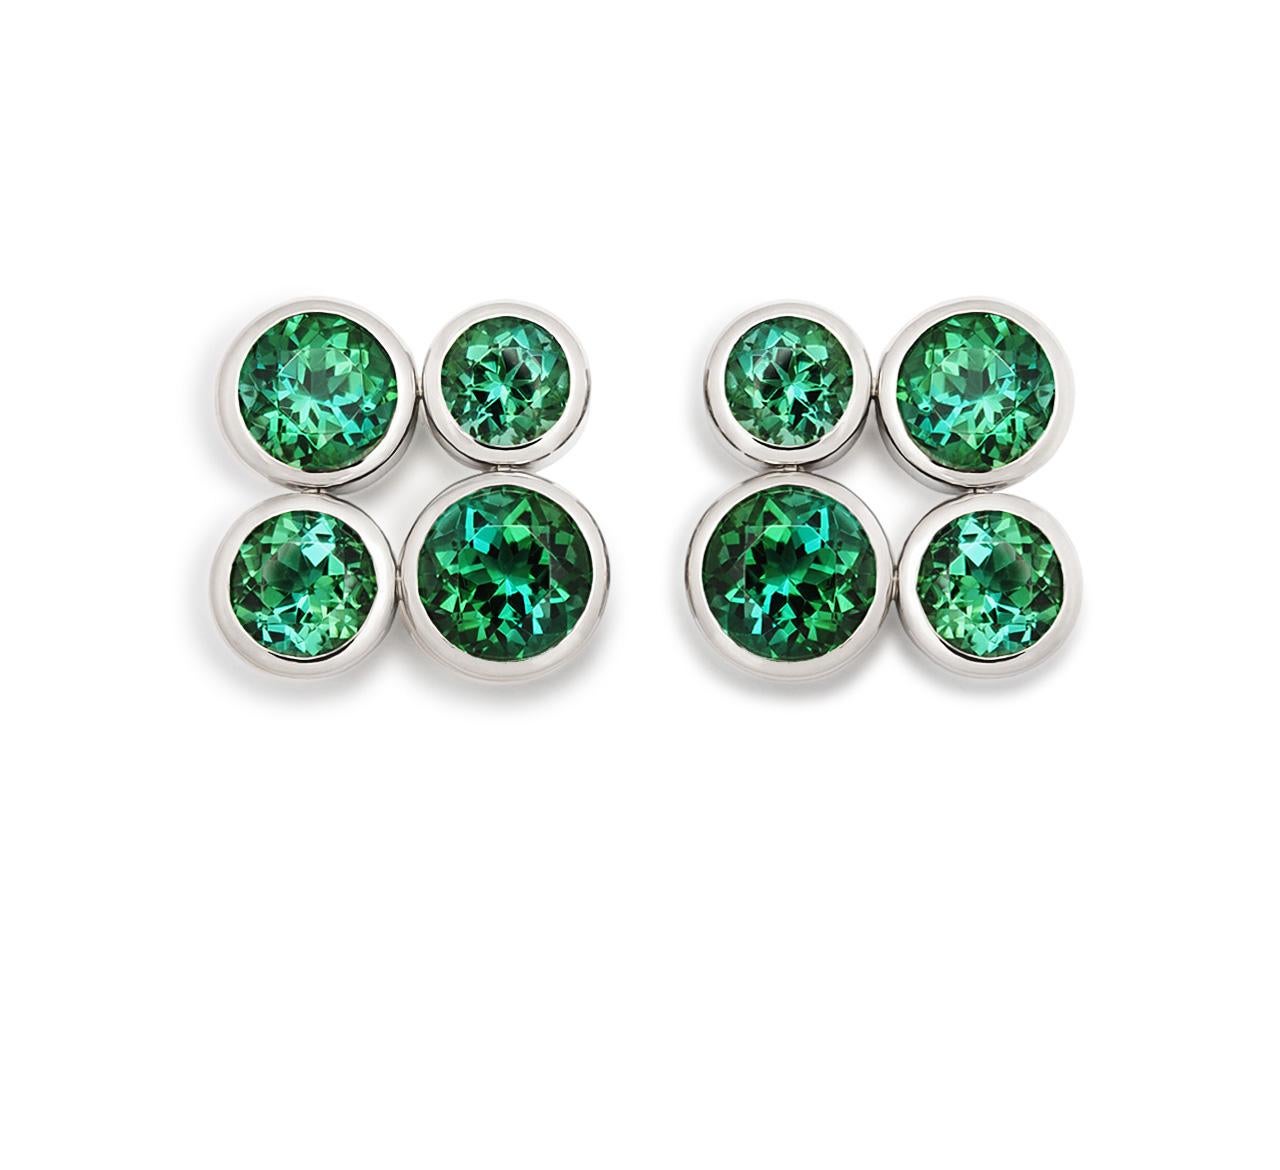 Studs in 18k white gold with 8 green Tourmalines 11,3 ct.
Designed by Colleen B. Rosenblat
